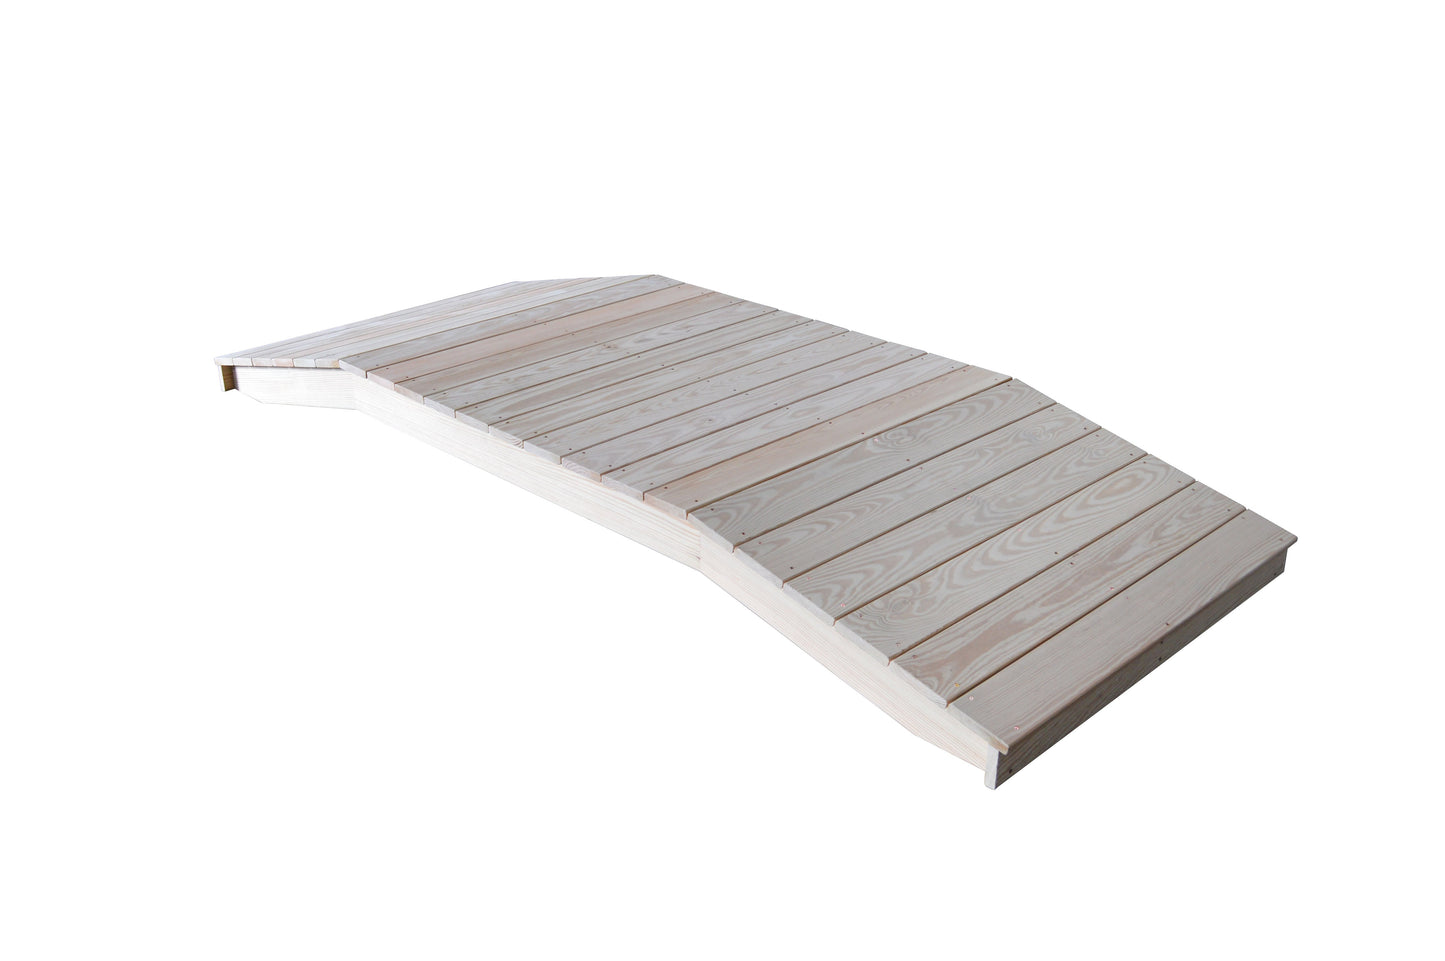 A&L Furniture Pressure Treated Pine 4' x  12' Standard Plank Bridge - LEAD TIME TO SHIP 10 BUSINESS DAY